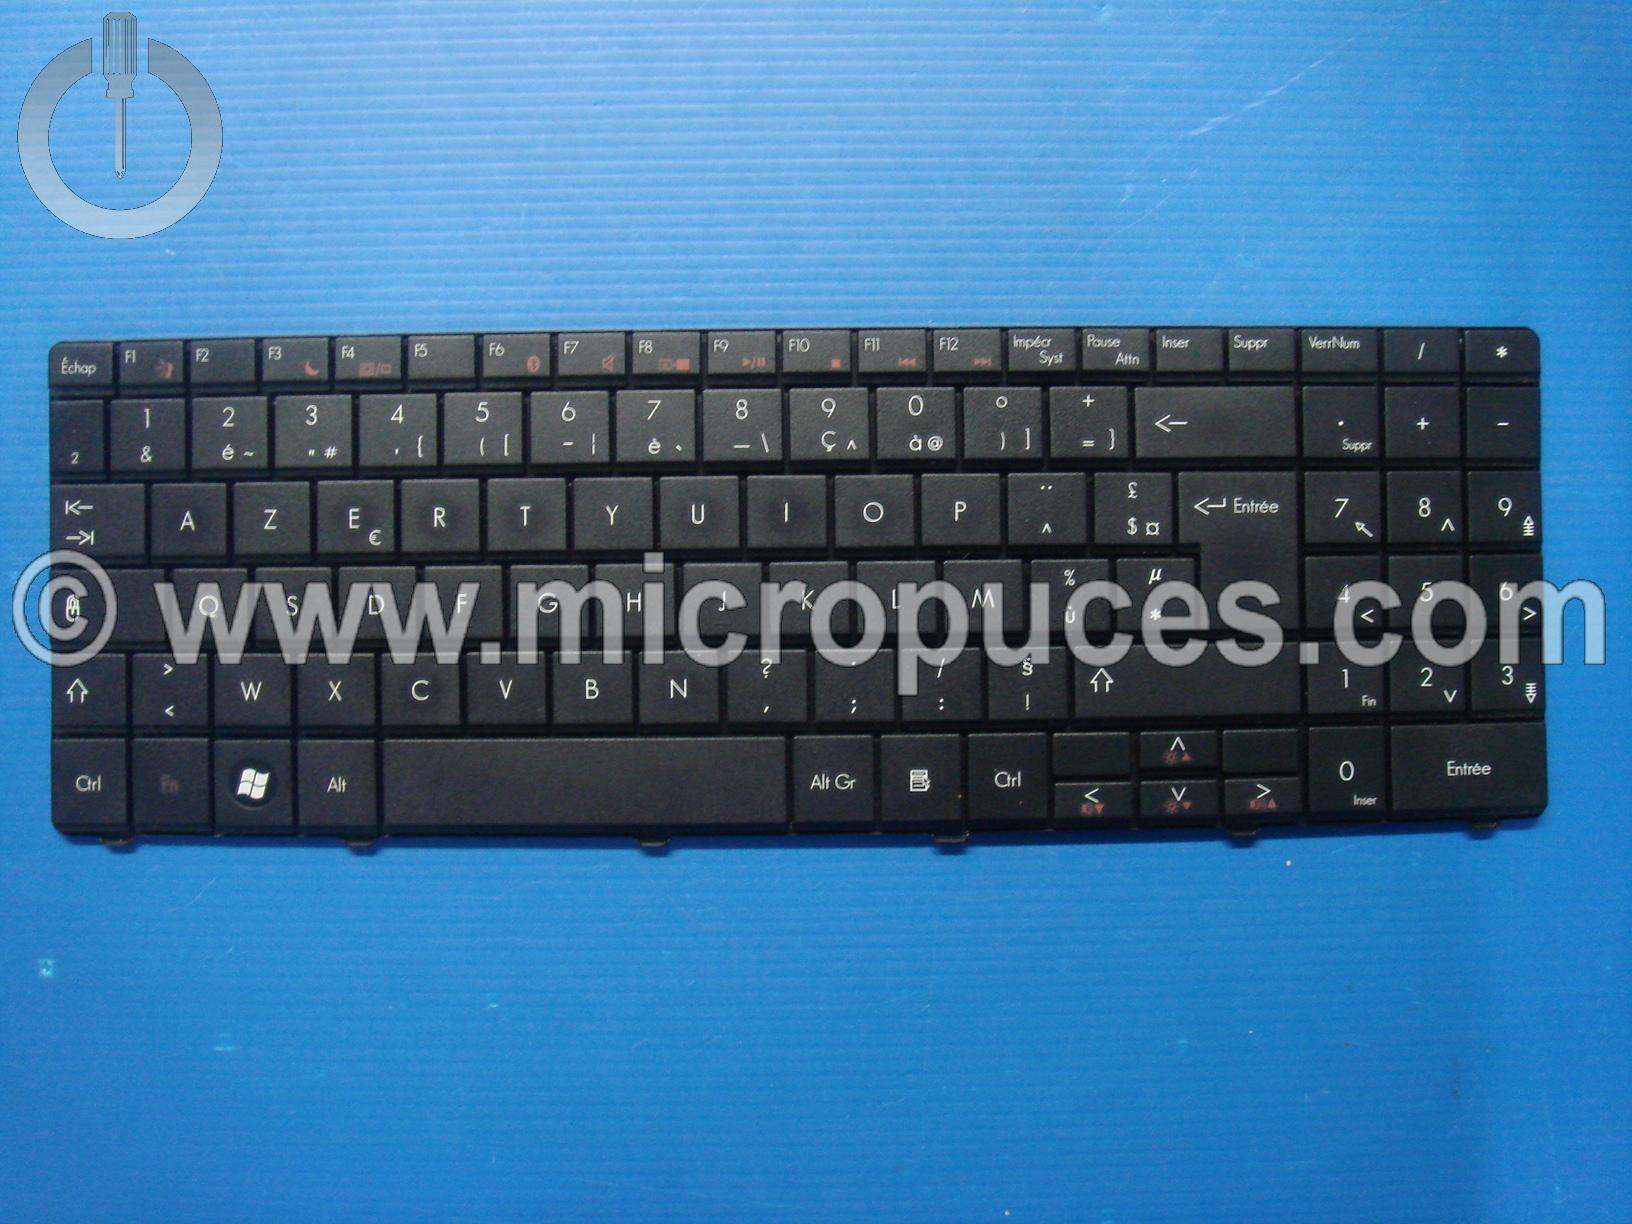 Clavier AZERTY pour PACKARD BELL EasyNote TJ67 LJ63